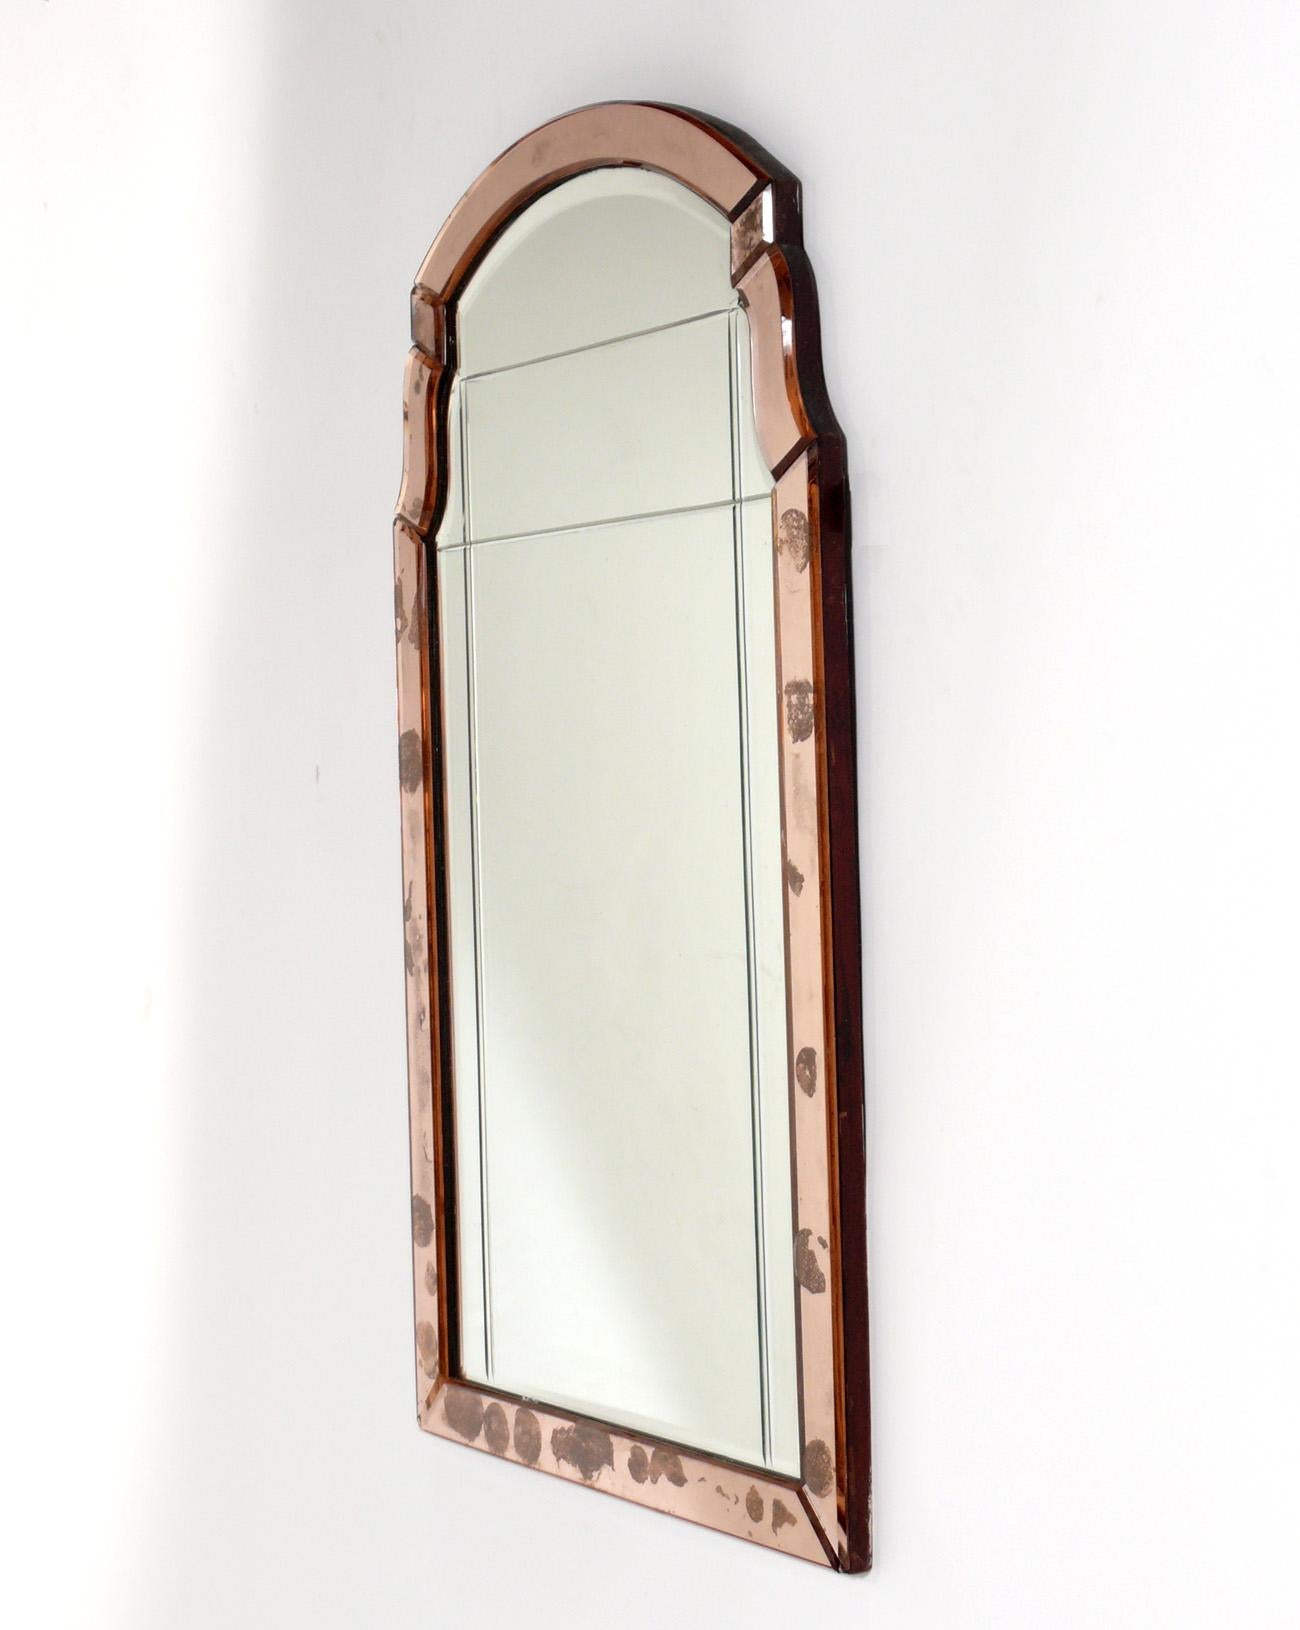 Glamorous Pink Art Deco Era Mirror, believed to be British, circa 1930s. Retains it's original distressed patina that you only get with age.